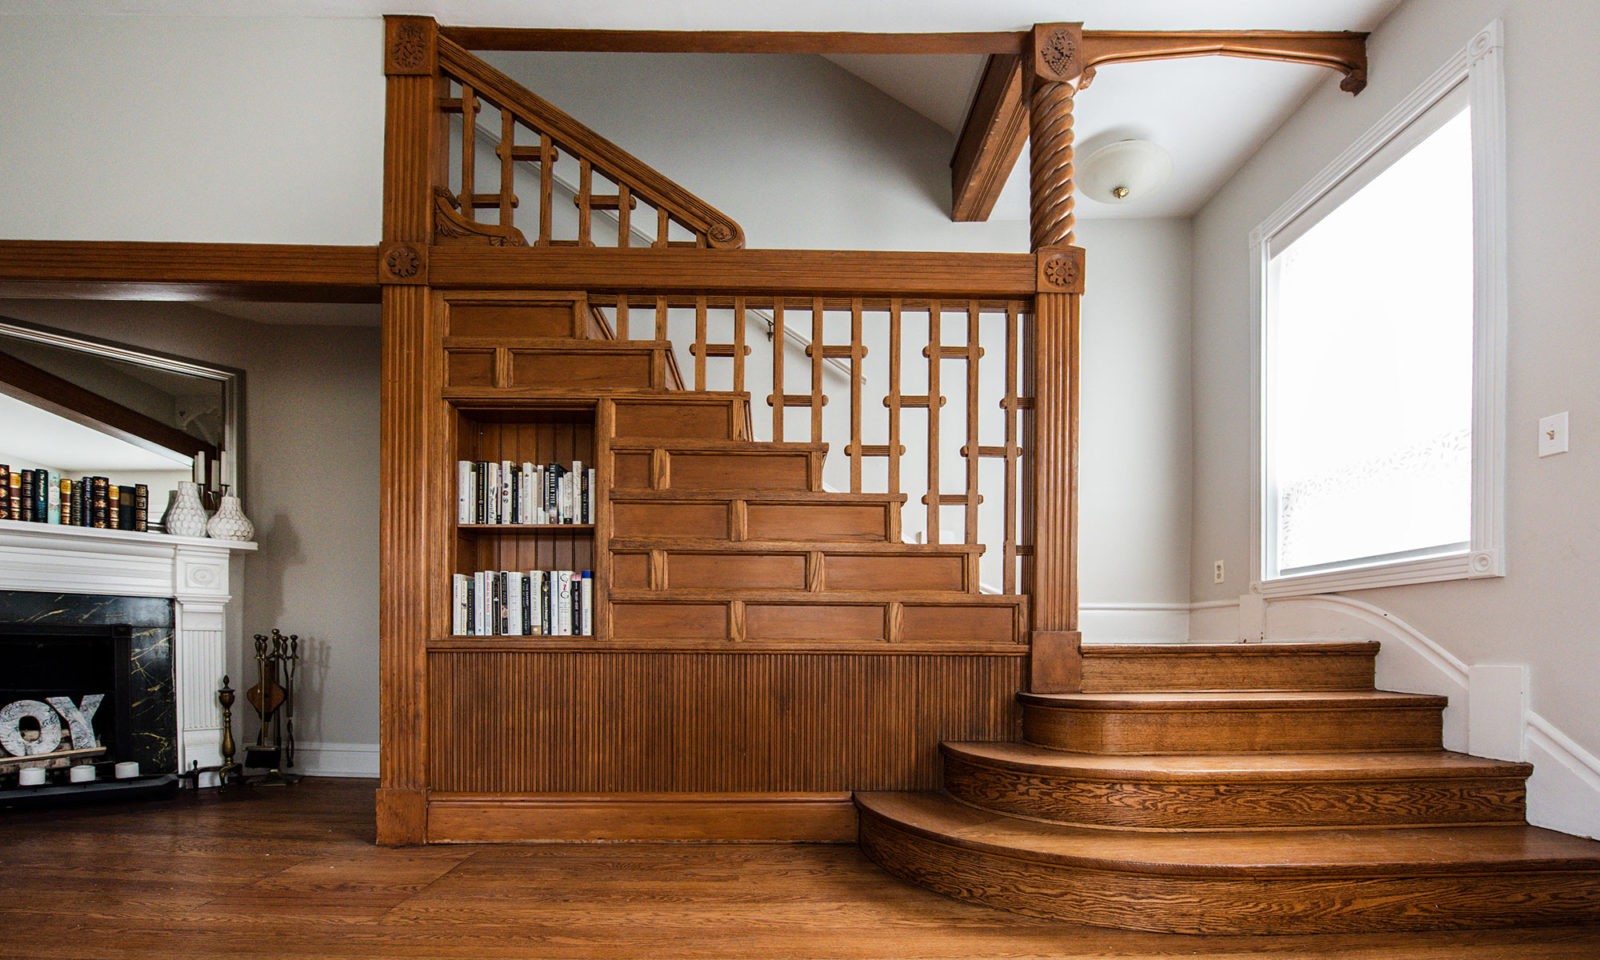 Newly renovated wooden stairway with grand entrance steps